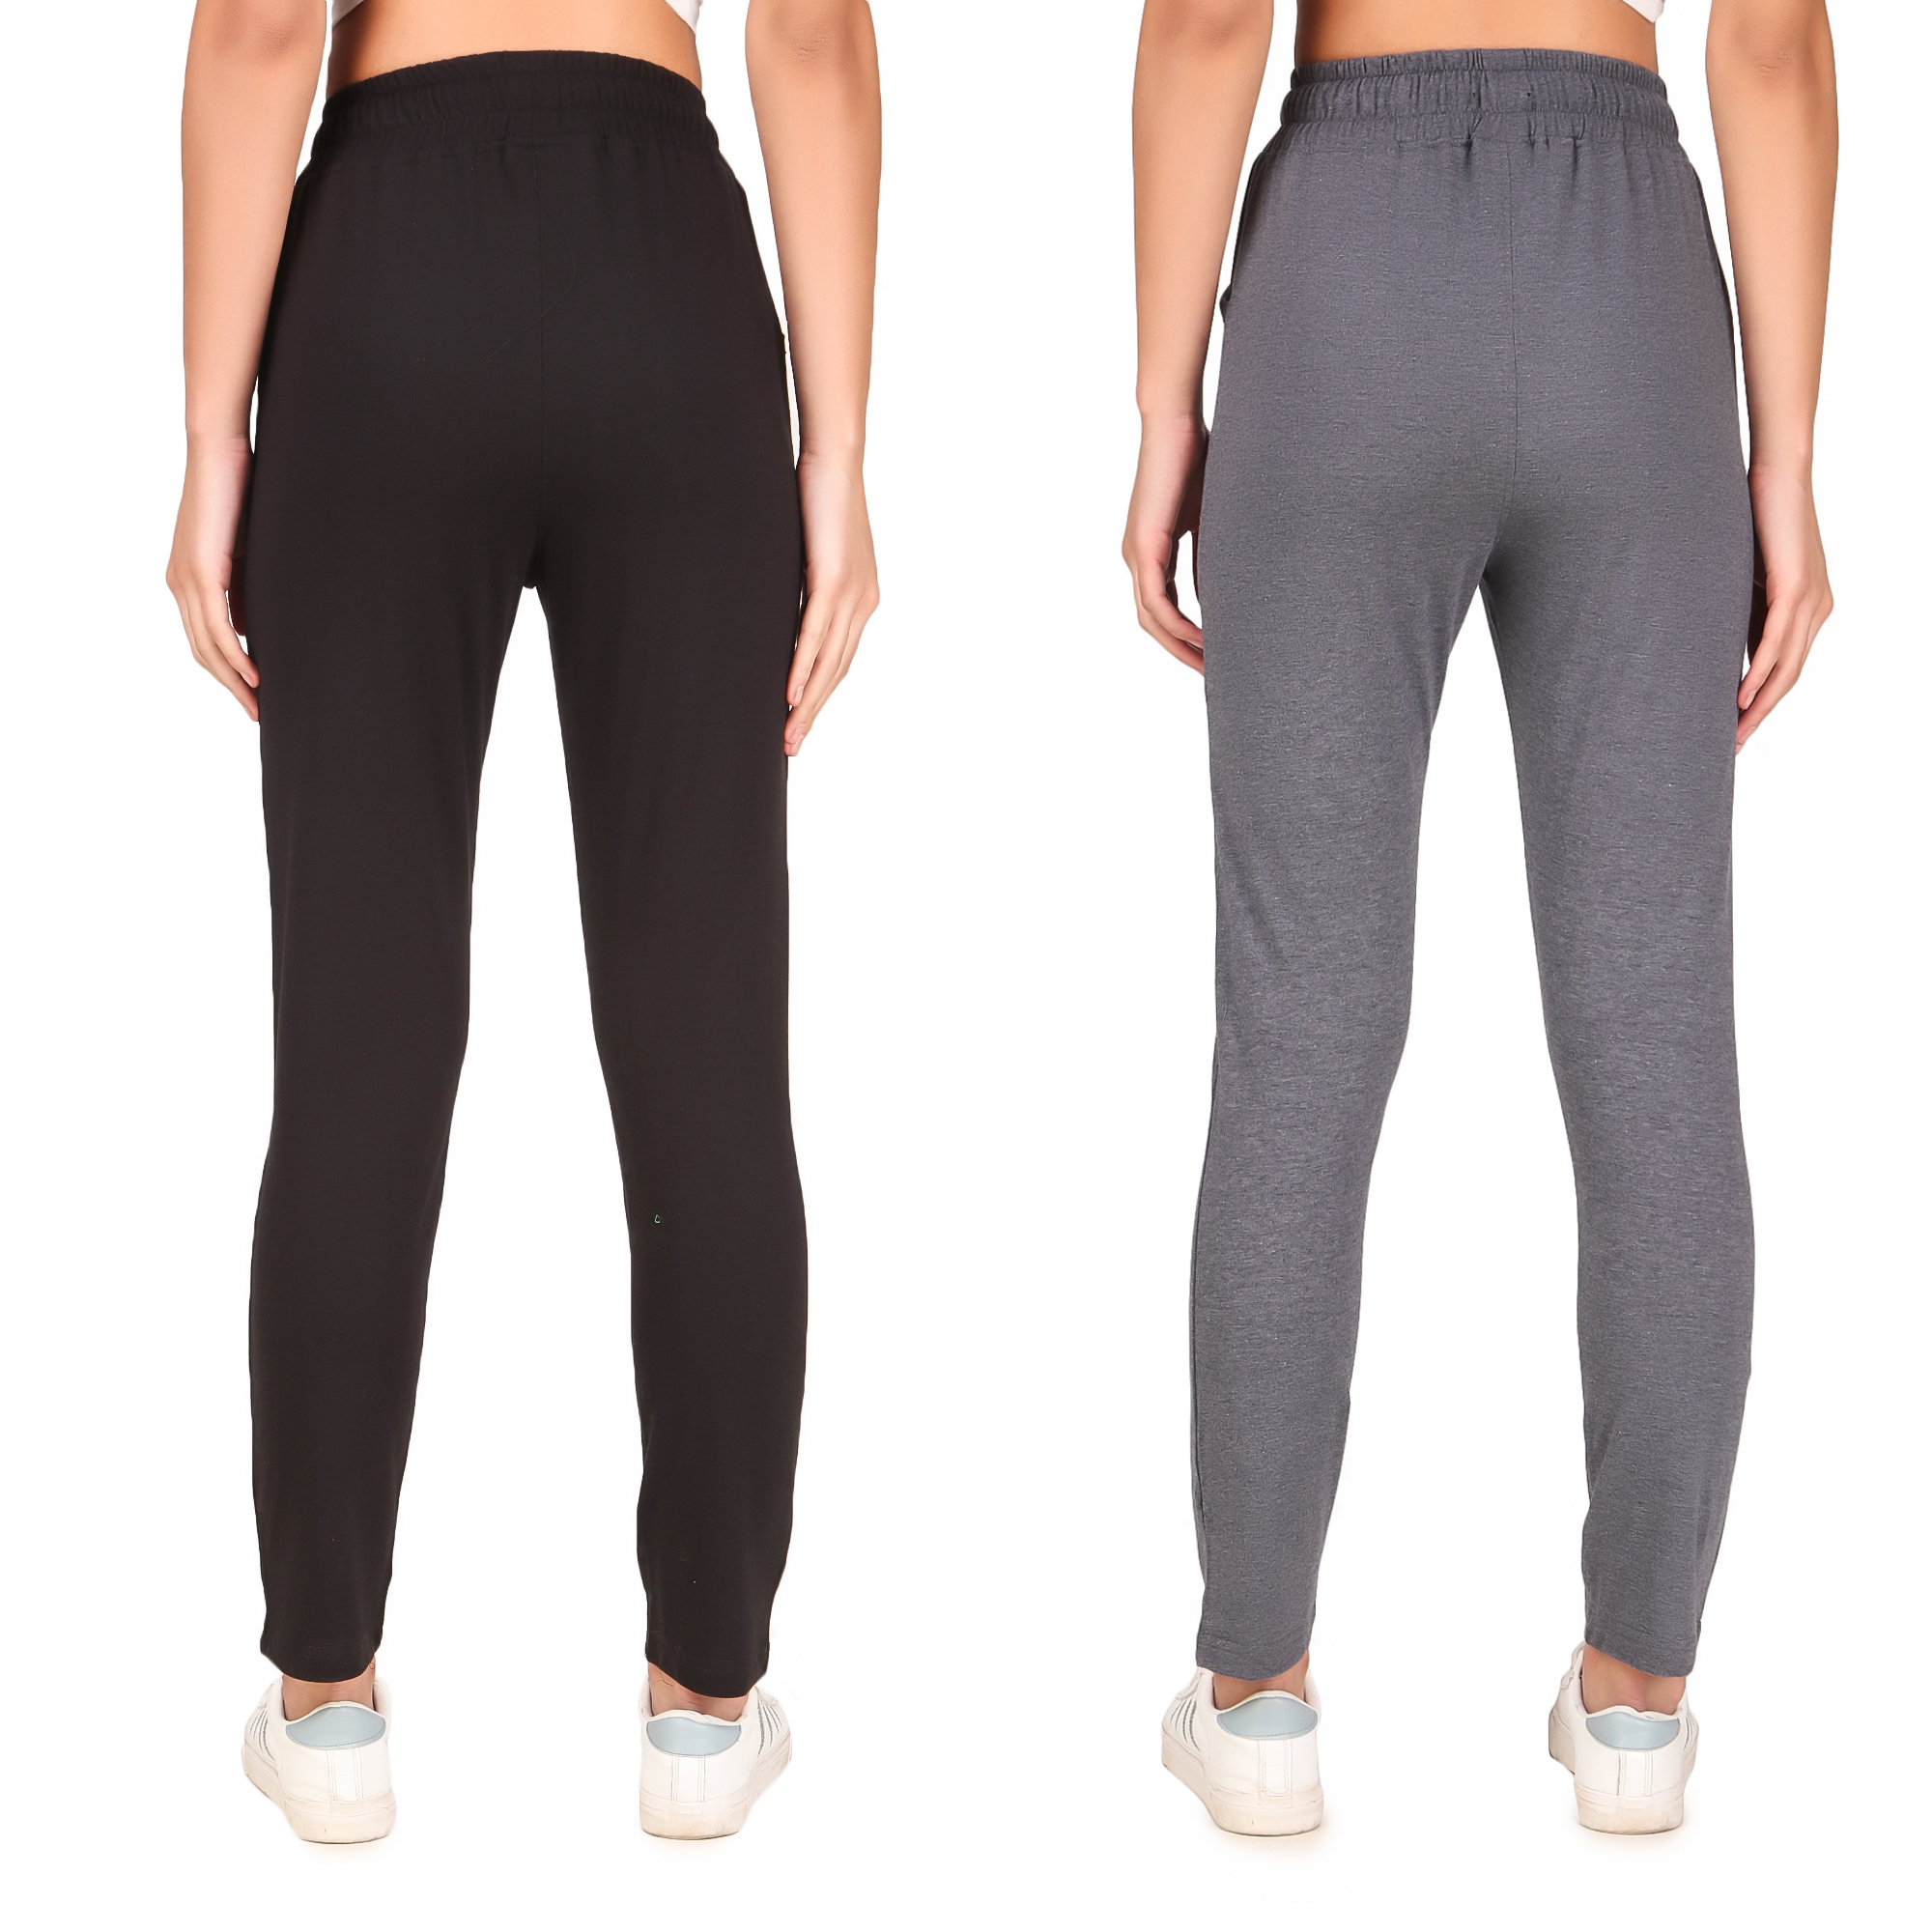 Regular fit Cotton Track Pants for Women's (Pack of 2)